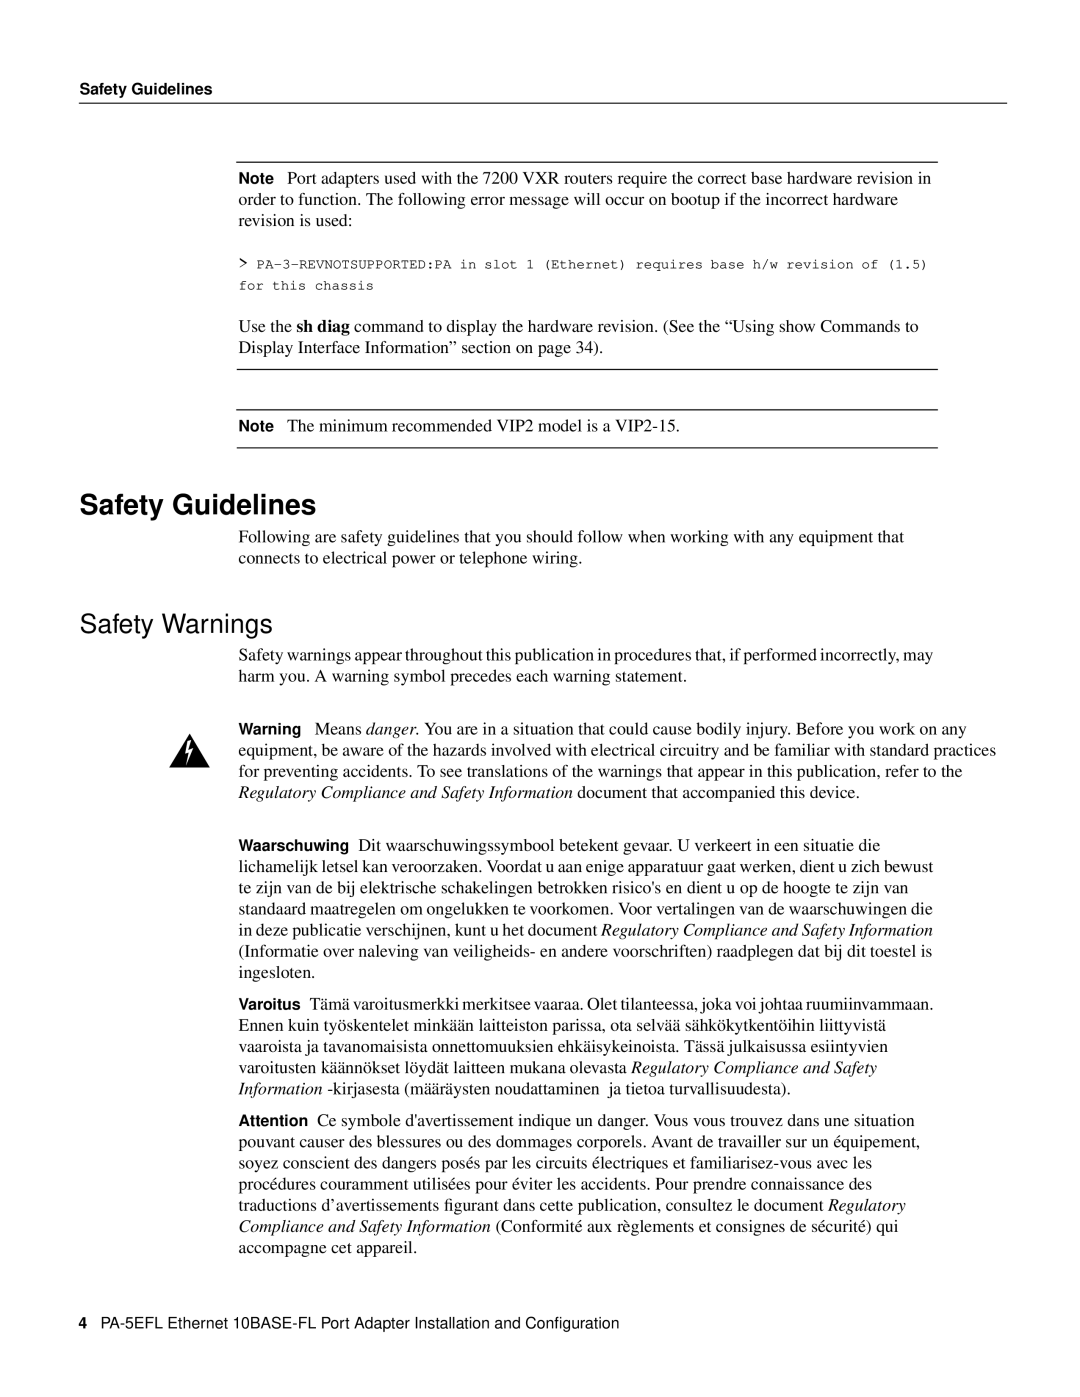 Cisco Systems PA-5EFL=, 10BASE-FL manual Safety Guidelines, Safety Warnings 